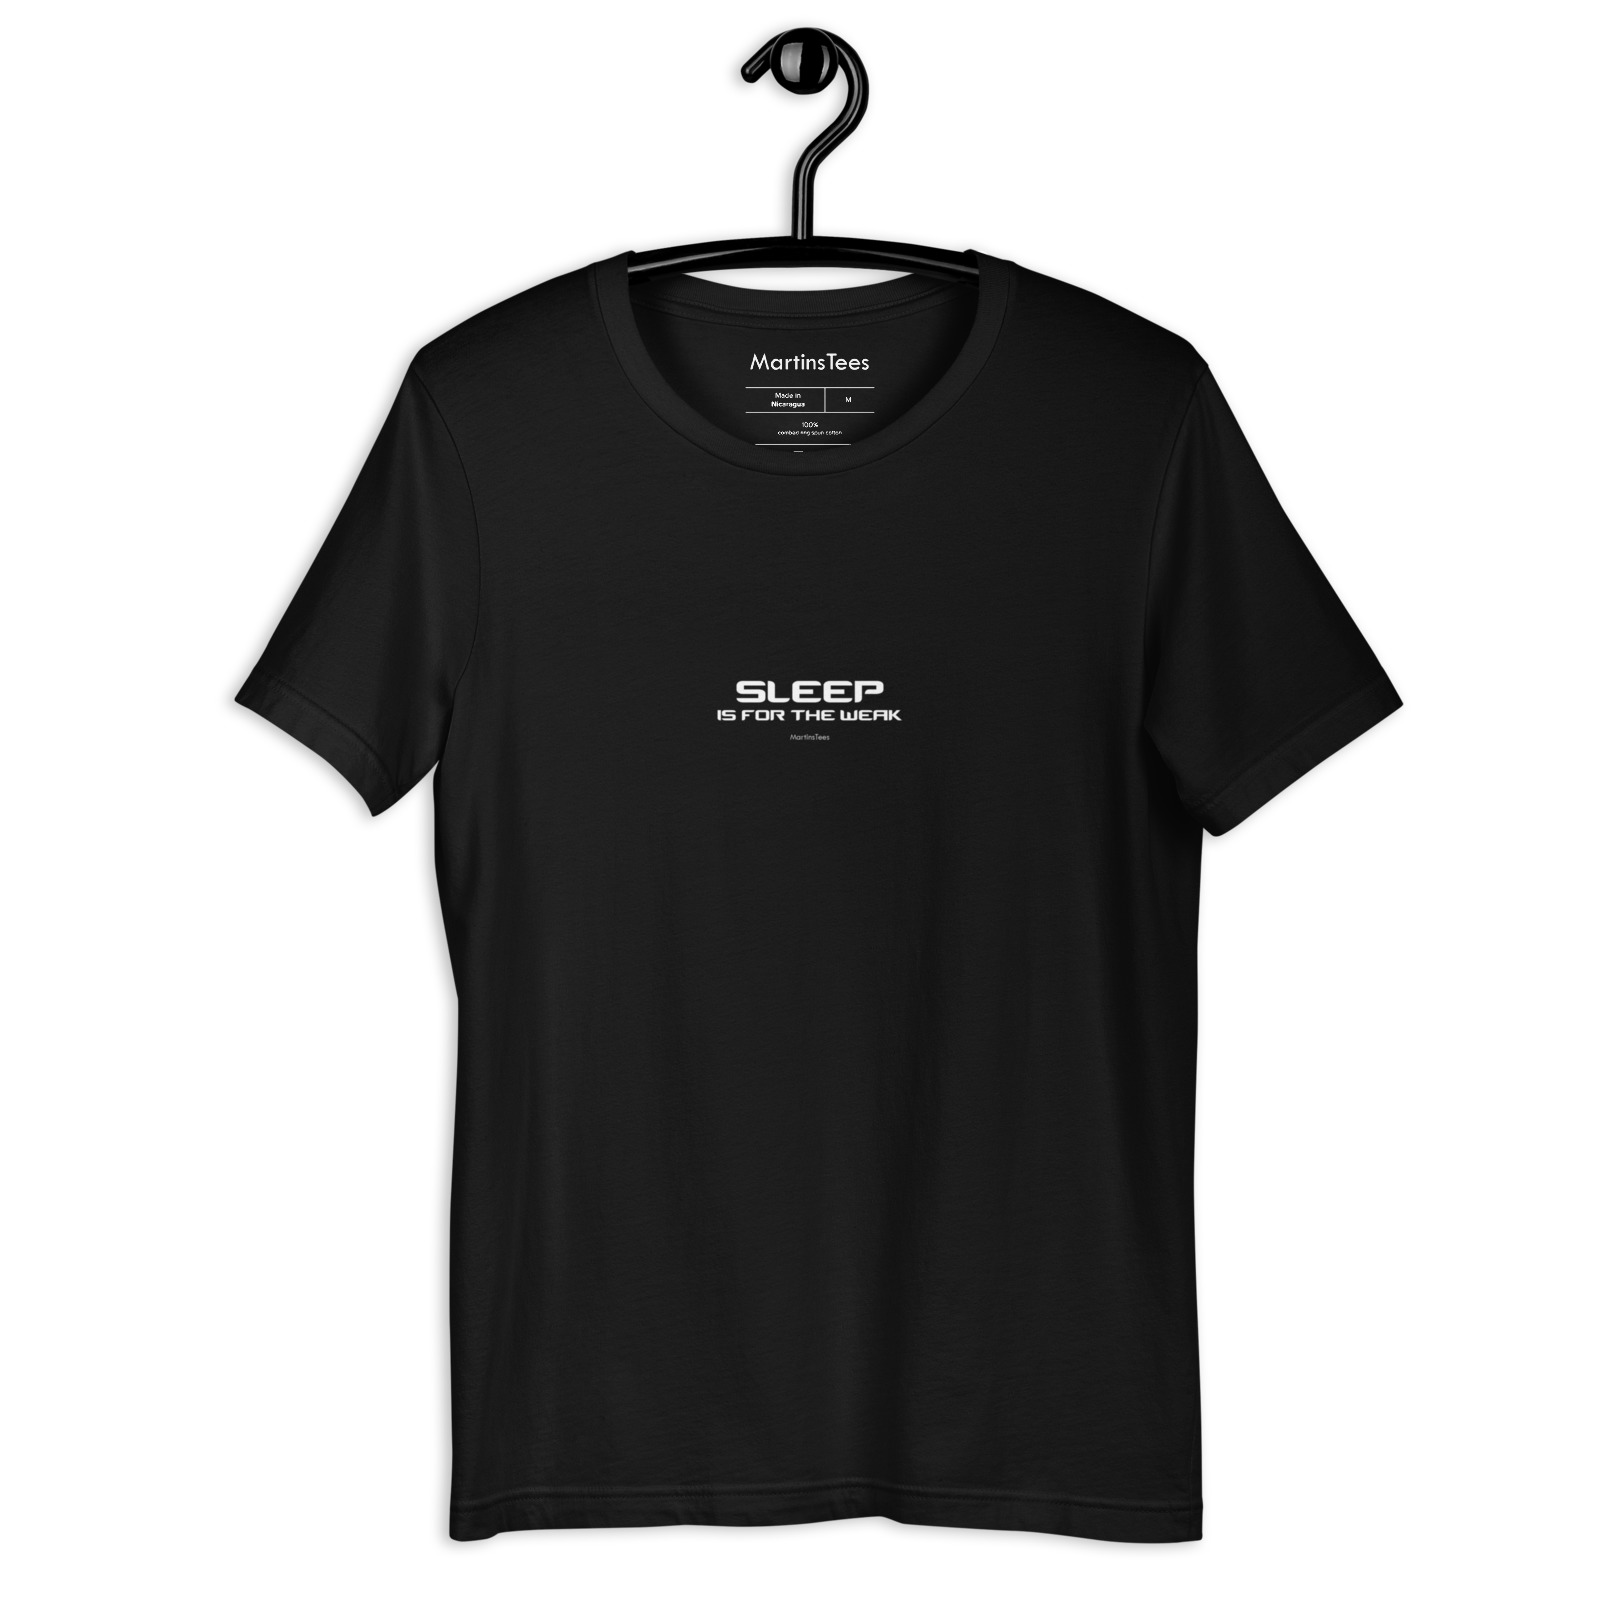 T-shirt: SLEEP - IS FOR THE WEAK